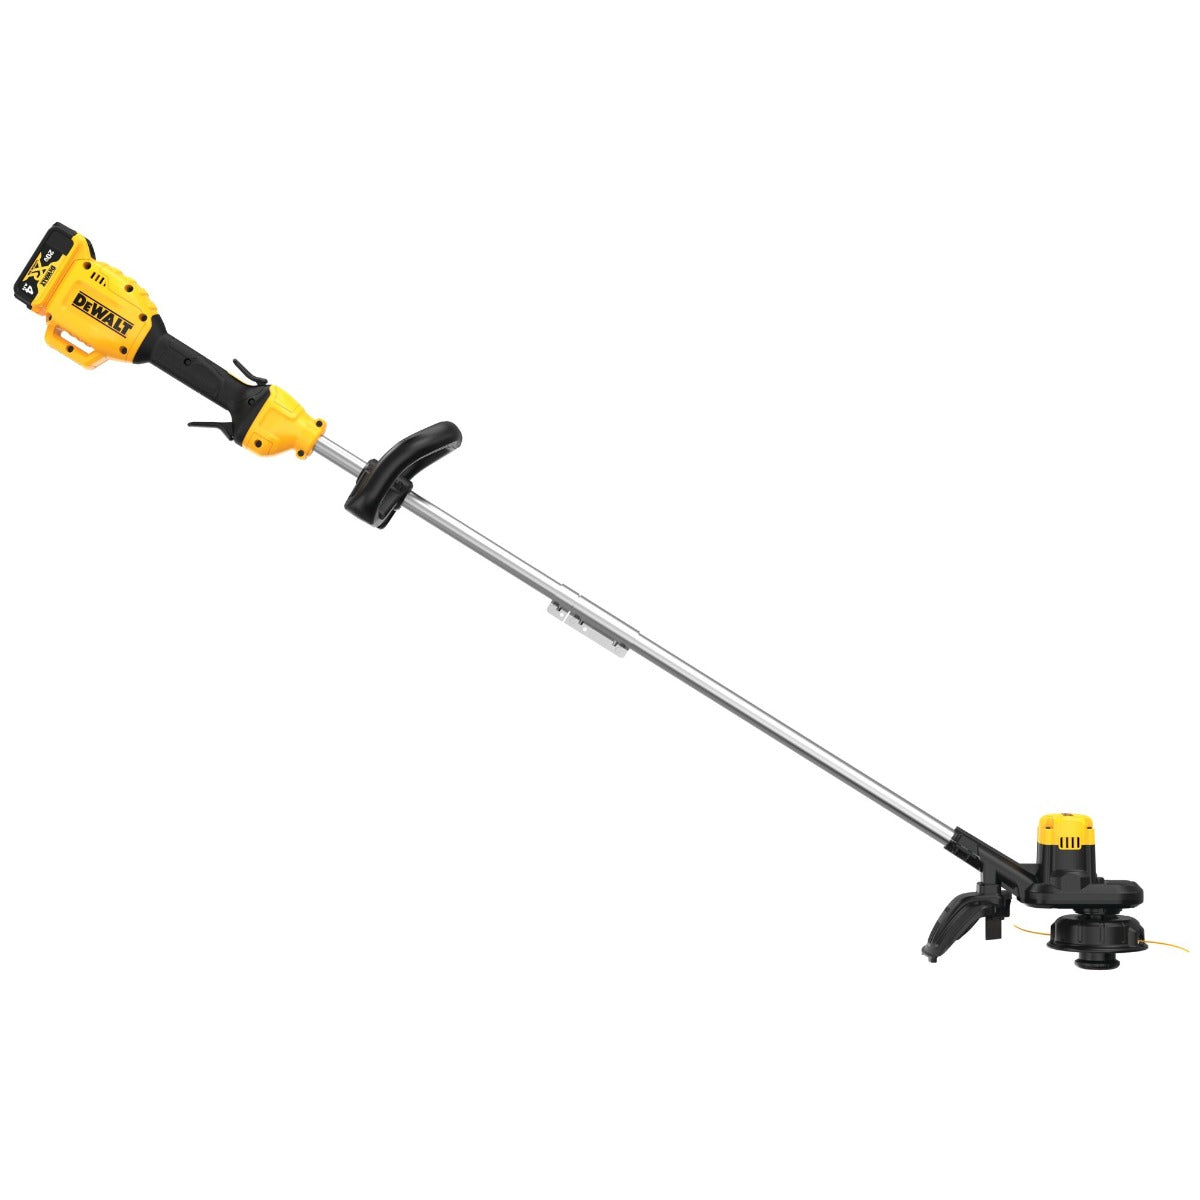 Dewalt DCST972B 60V Max* 17 In. Brushless Attachment Capable String Trimmer (Tool Only)